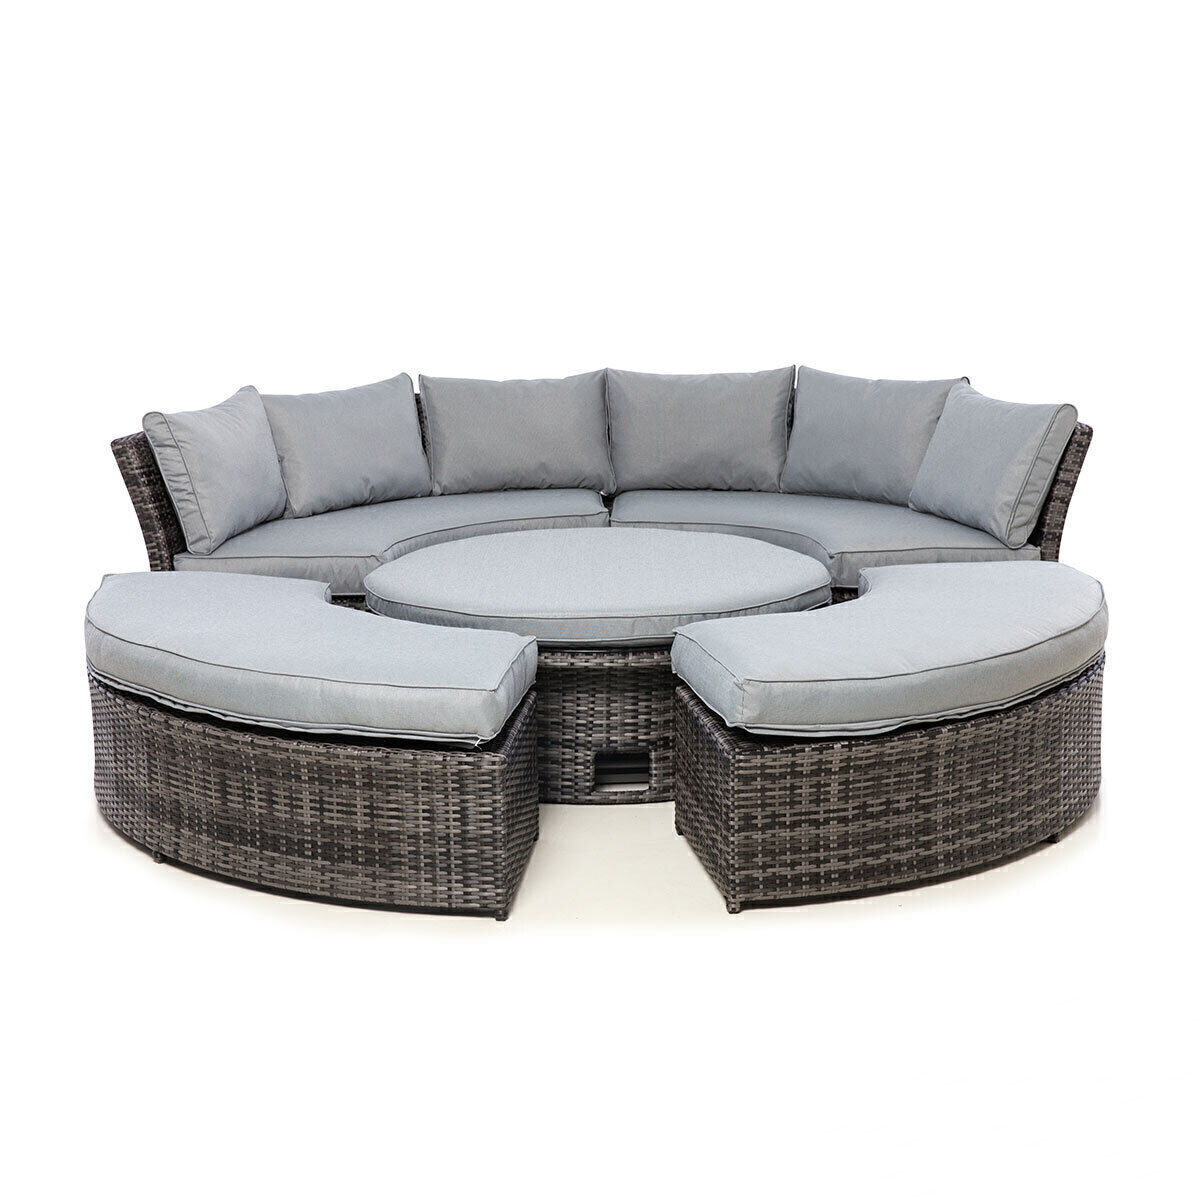 Maze - Chelsea Rattan Lifestyle Suite with Rising Table - Grey product image